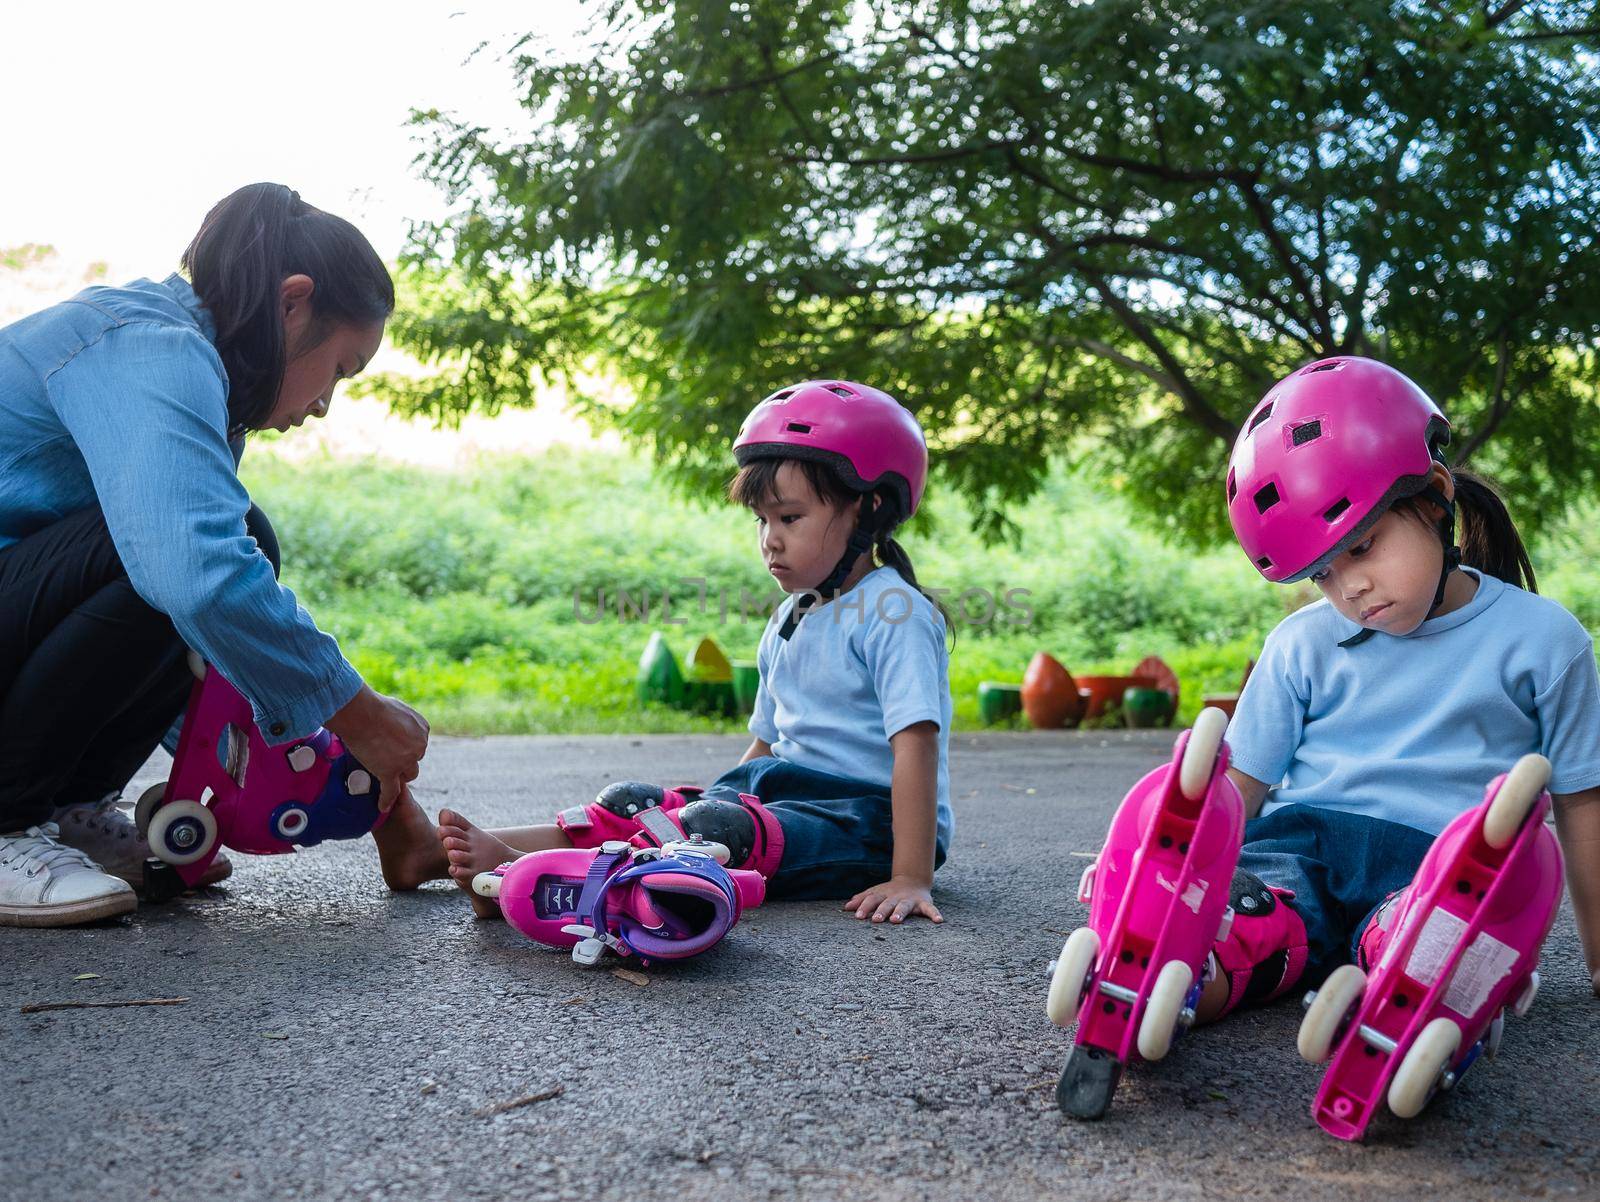 Young mother helps her daughter put on protective pads and a safety helmet before her roller skating practice on the park road. Active outdoor sport for kids.